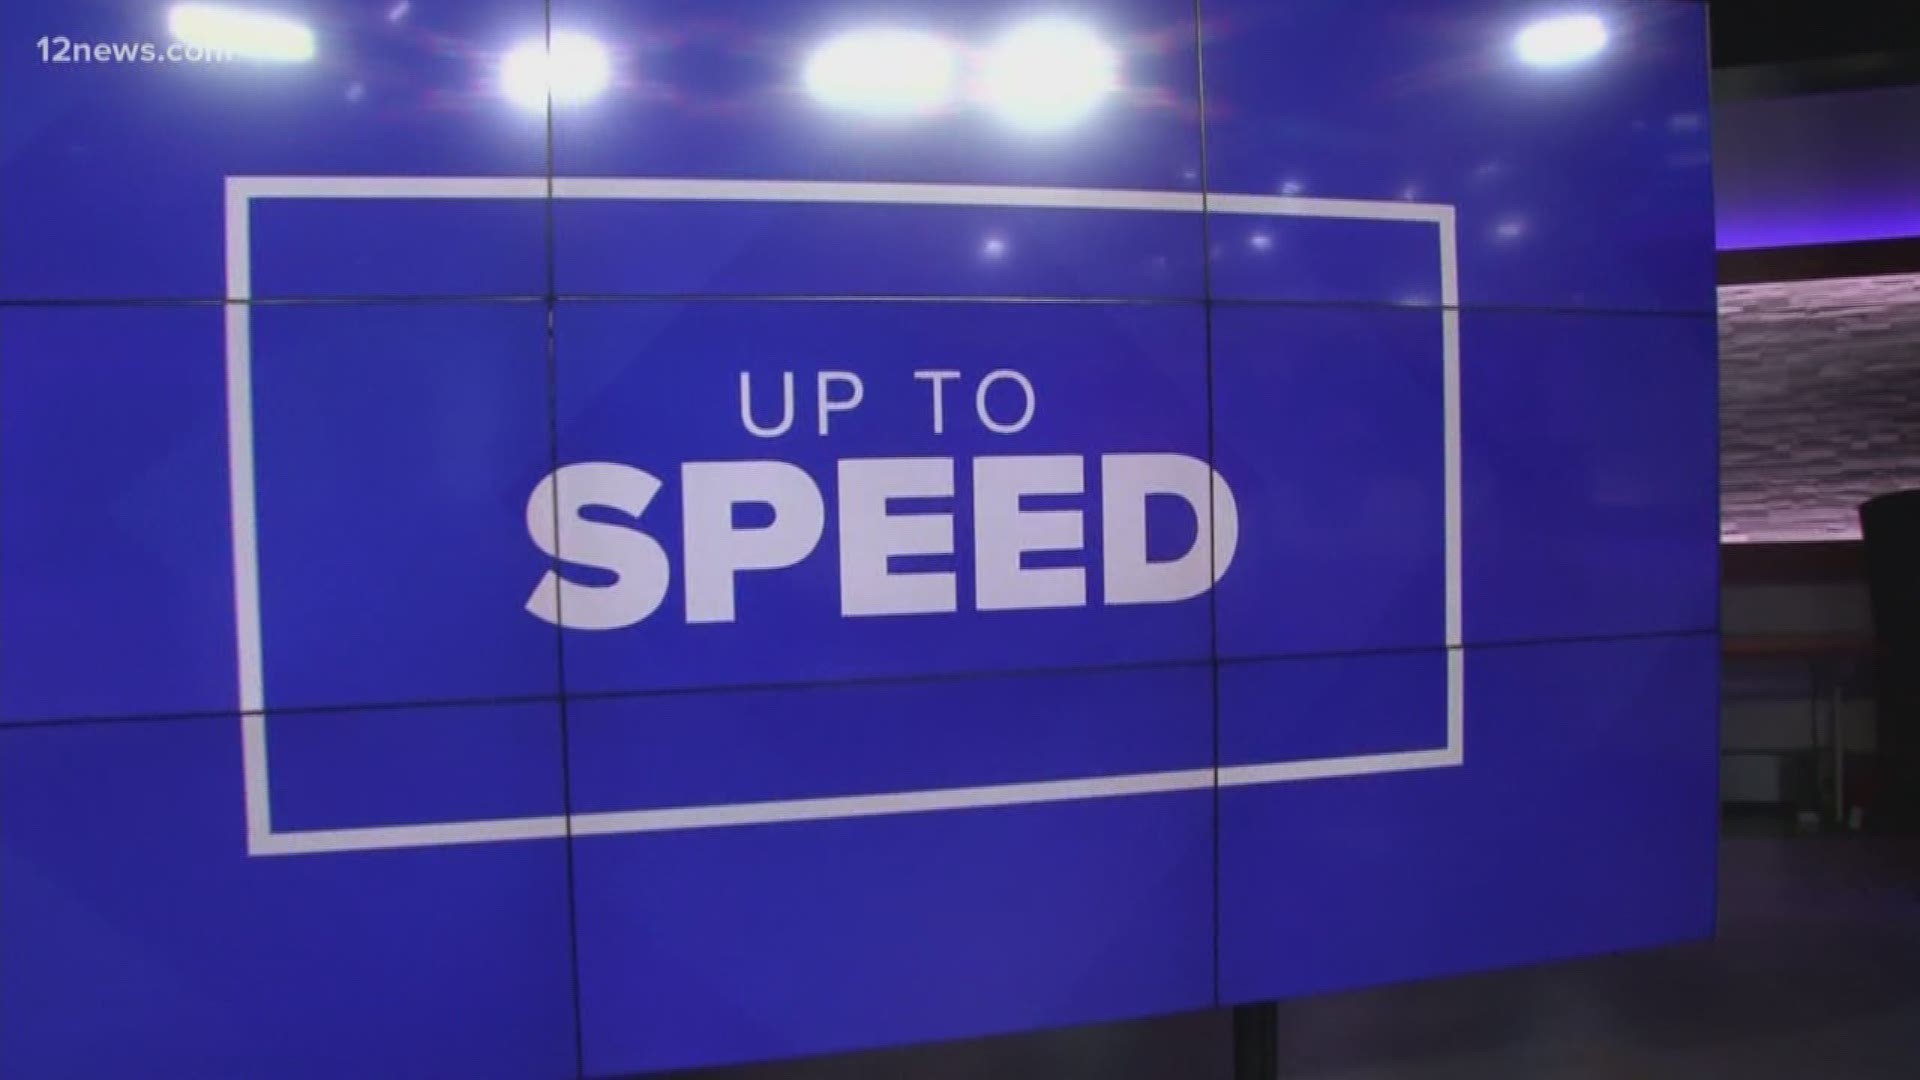 12 News brings you "Up to Speed" on major news of the day in the Valley and Arizona. Stories today include the arrest of a woman for a shooting from September and an Arizona sky diving team bringing home a win.